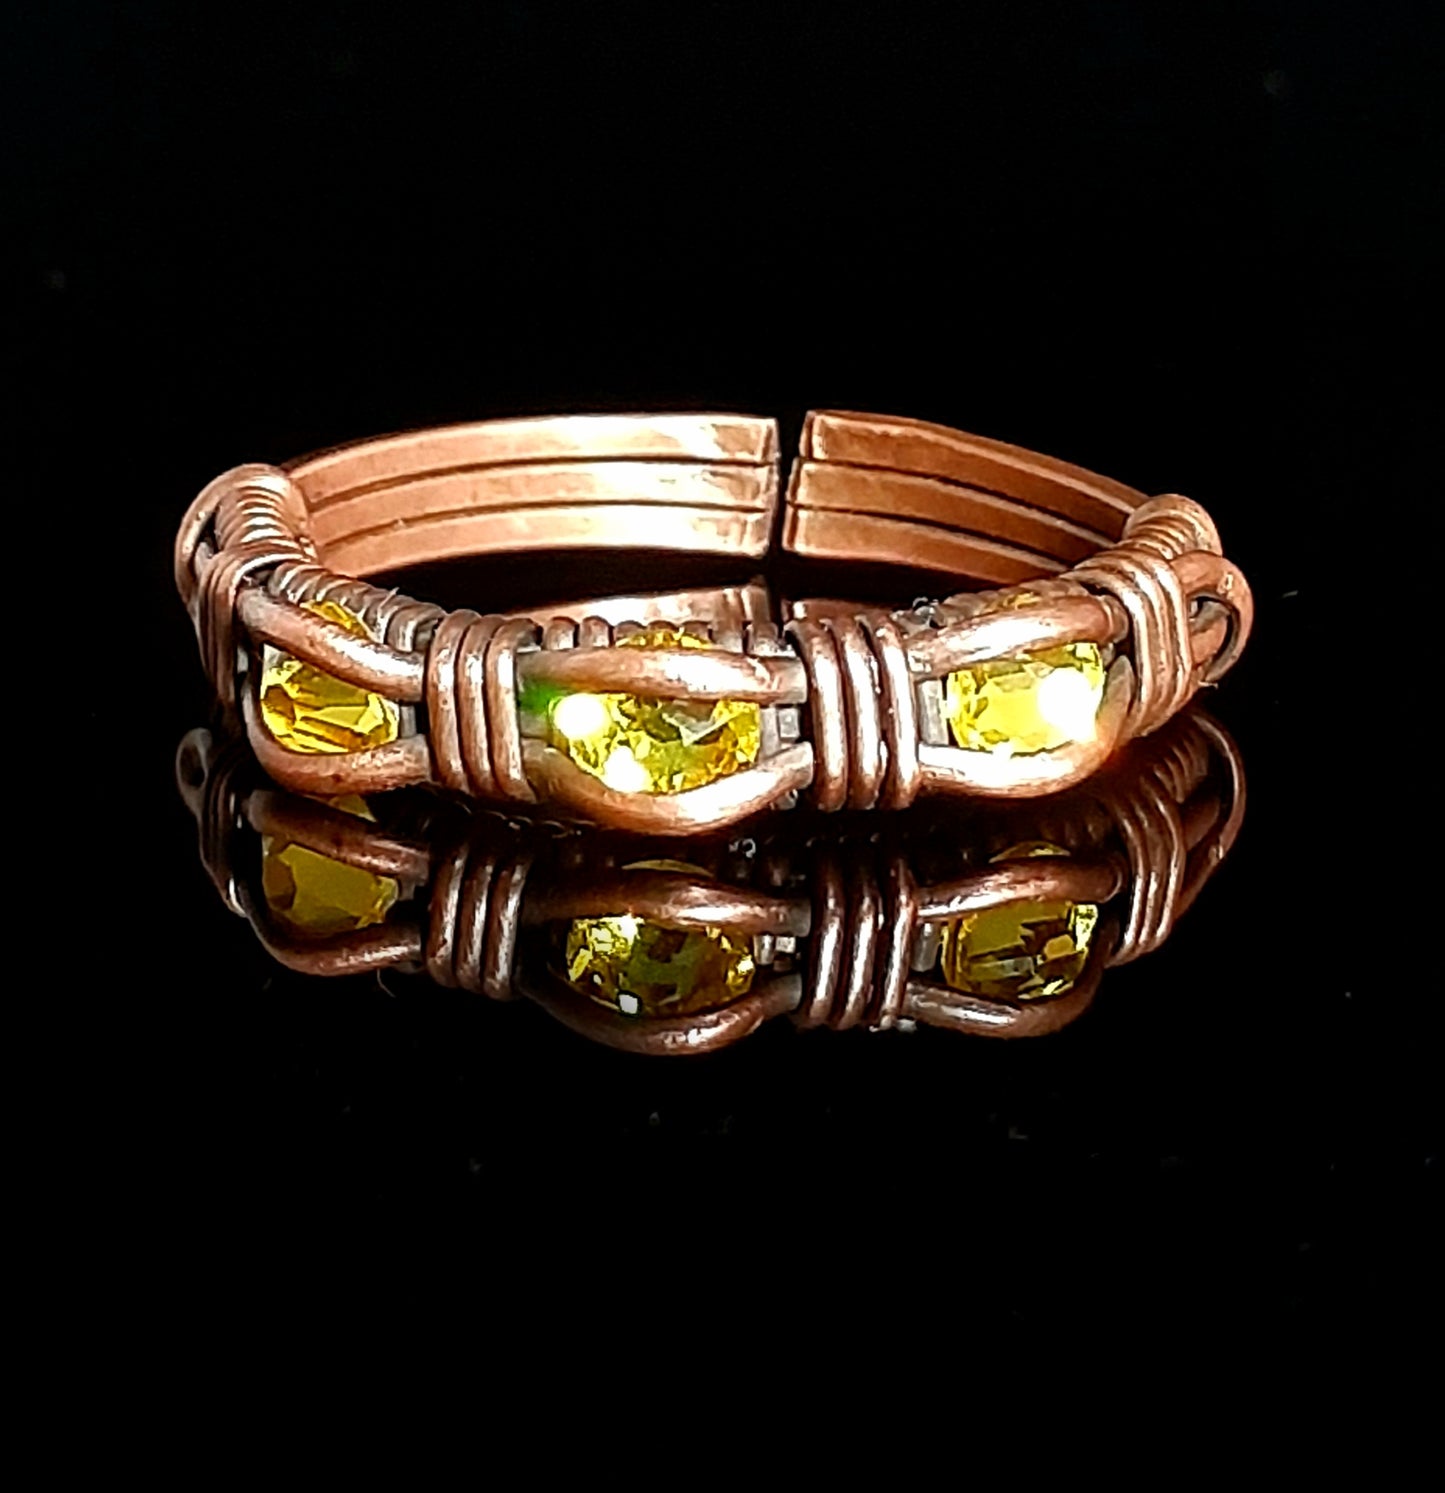 Size 8 oxidized copper wire with 3 yellow high quality crystals. ring has slight adjustment